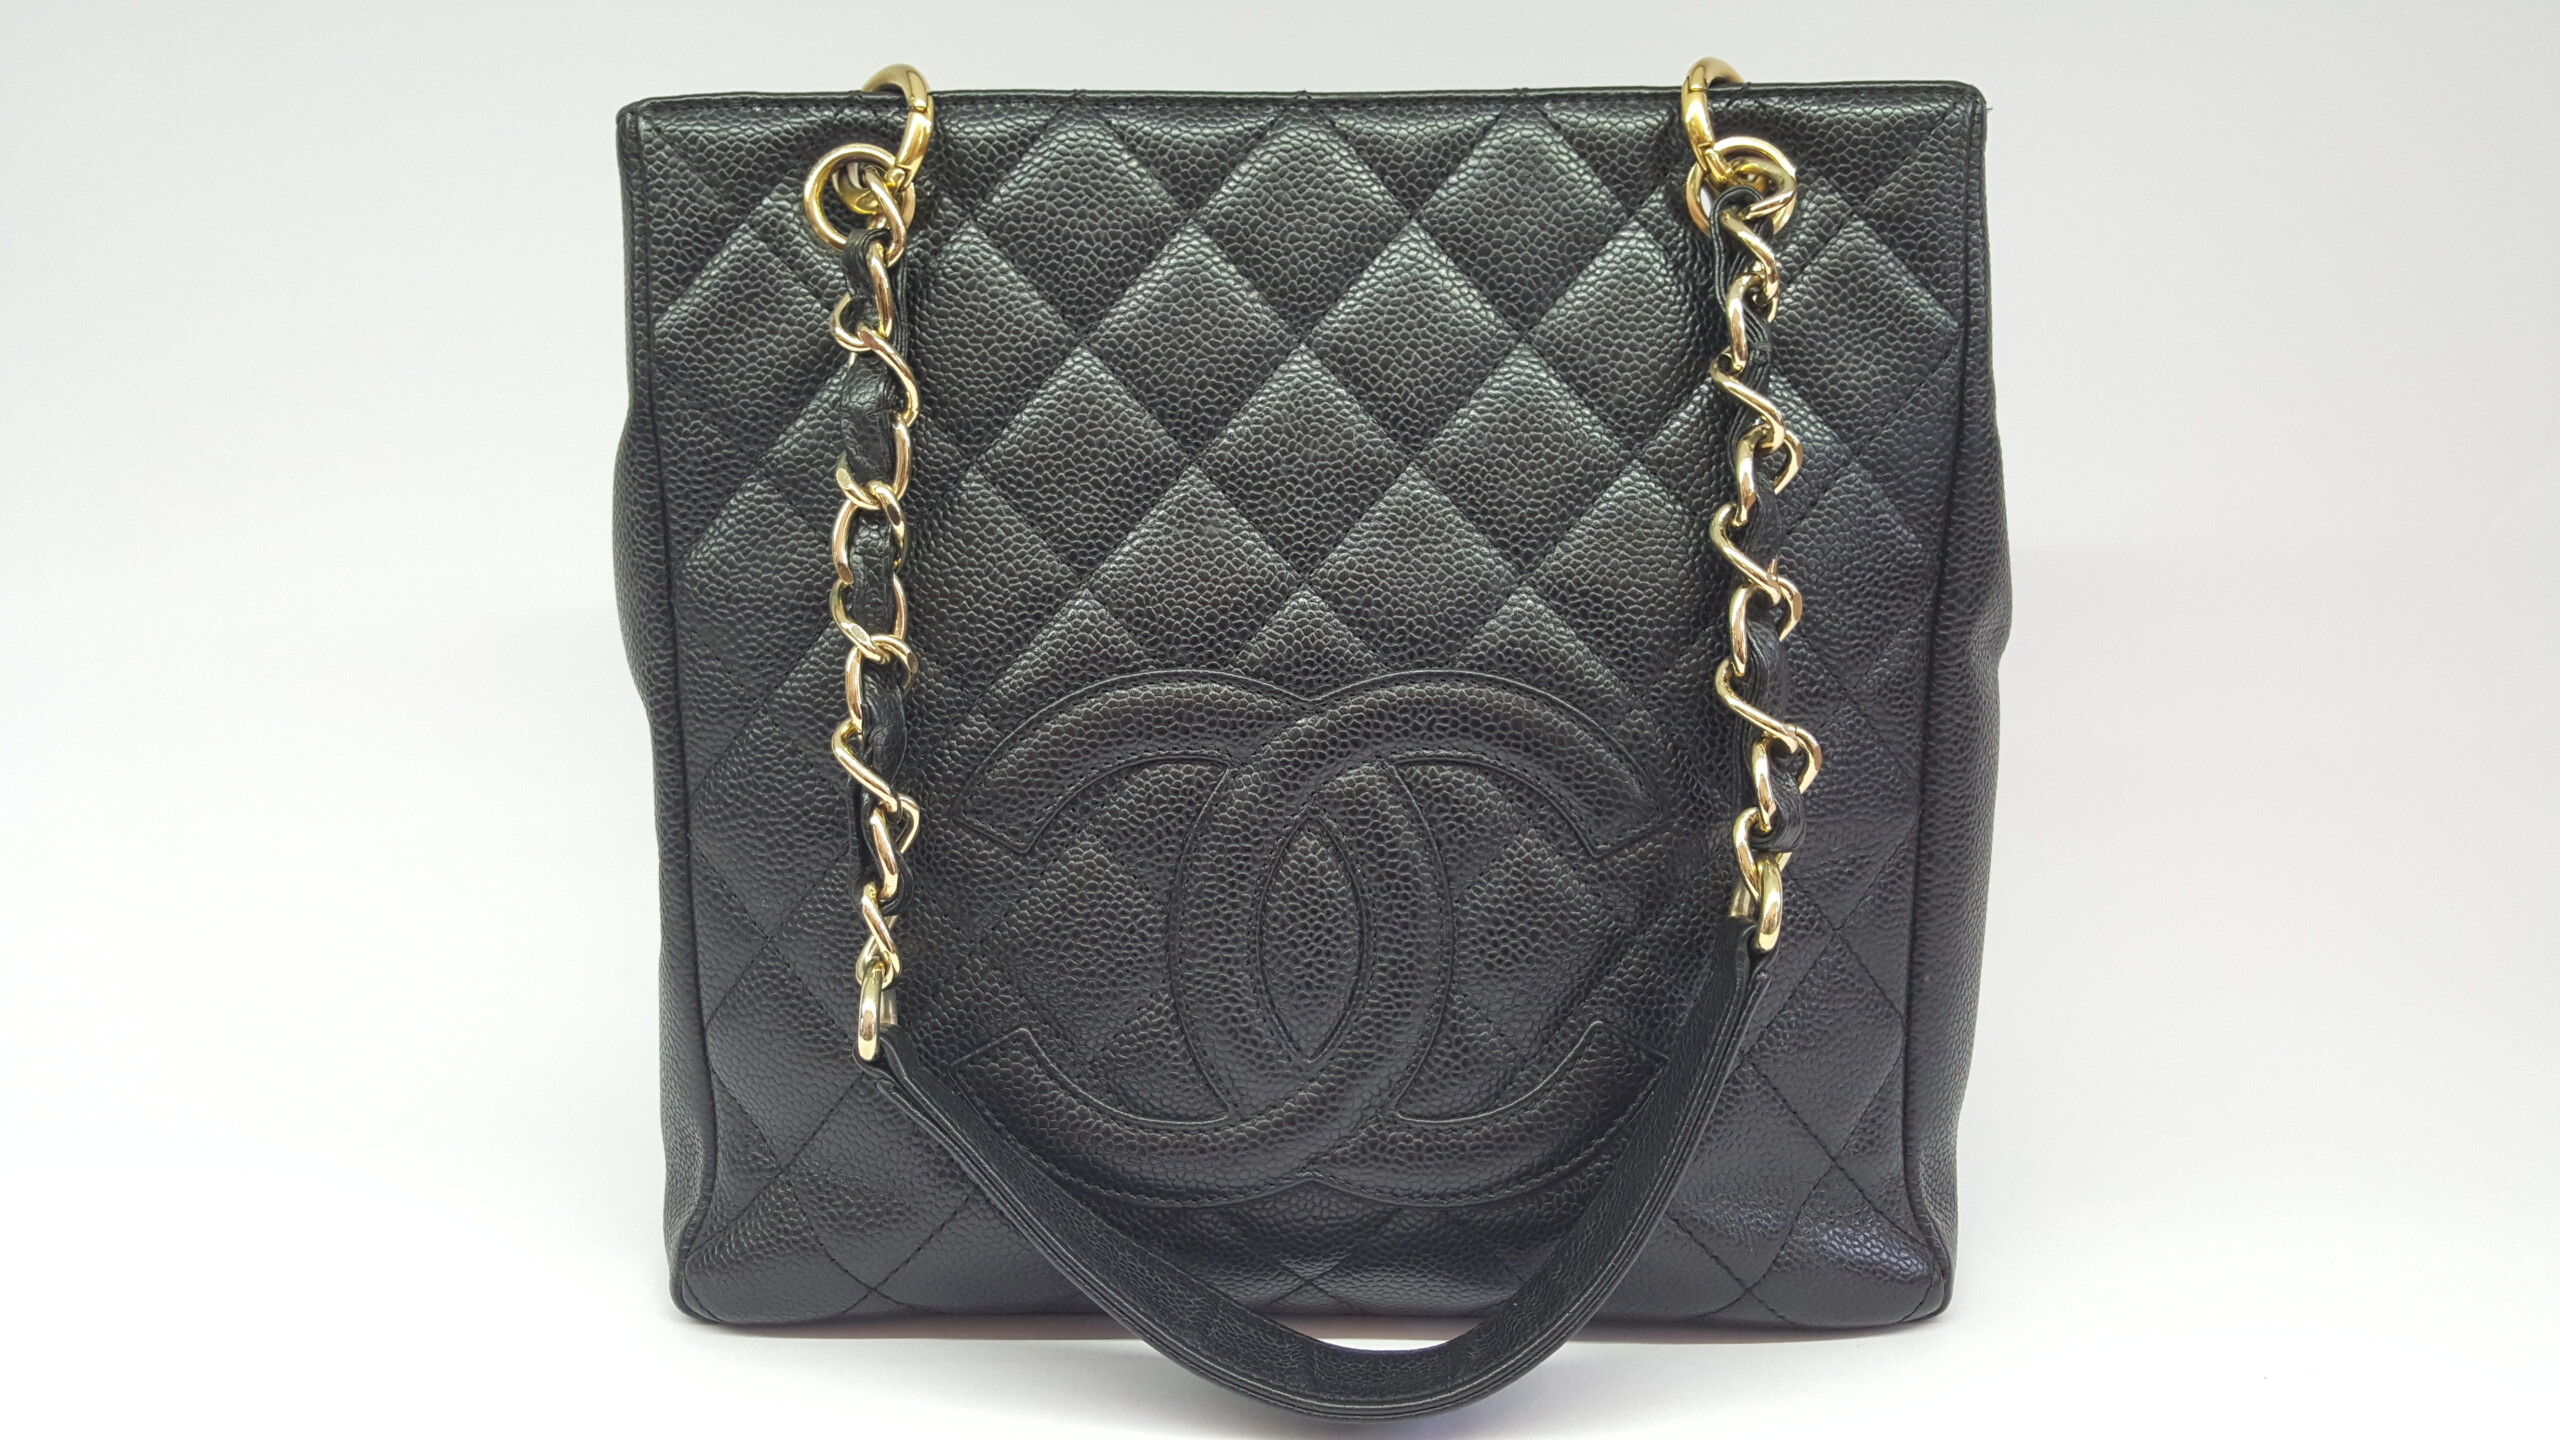 CHANEL, Bags, Chanel Caviar Quilted Timeless Shopping Tote Pst